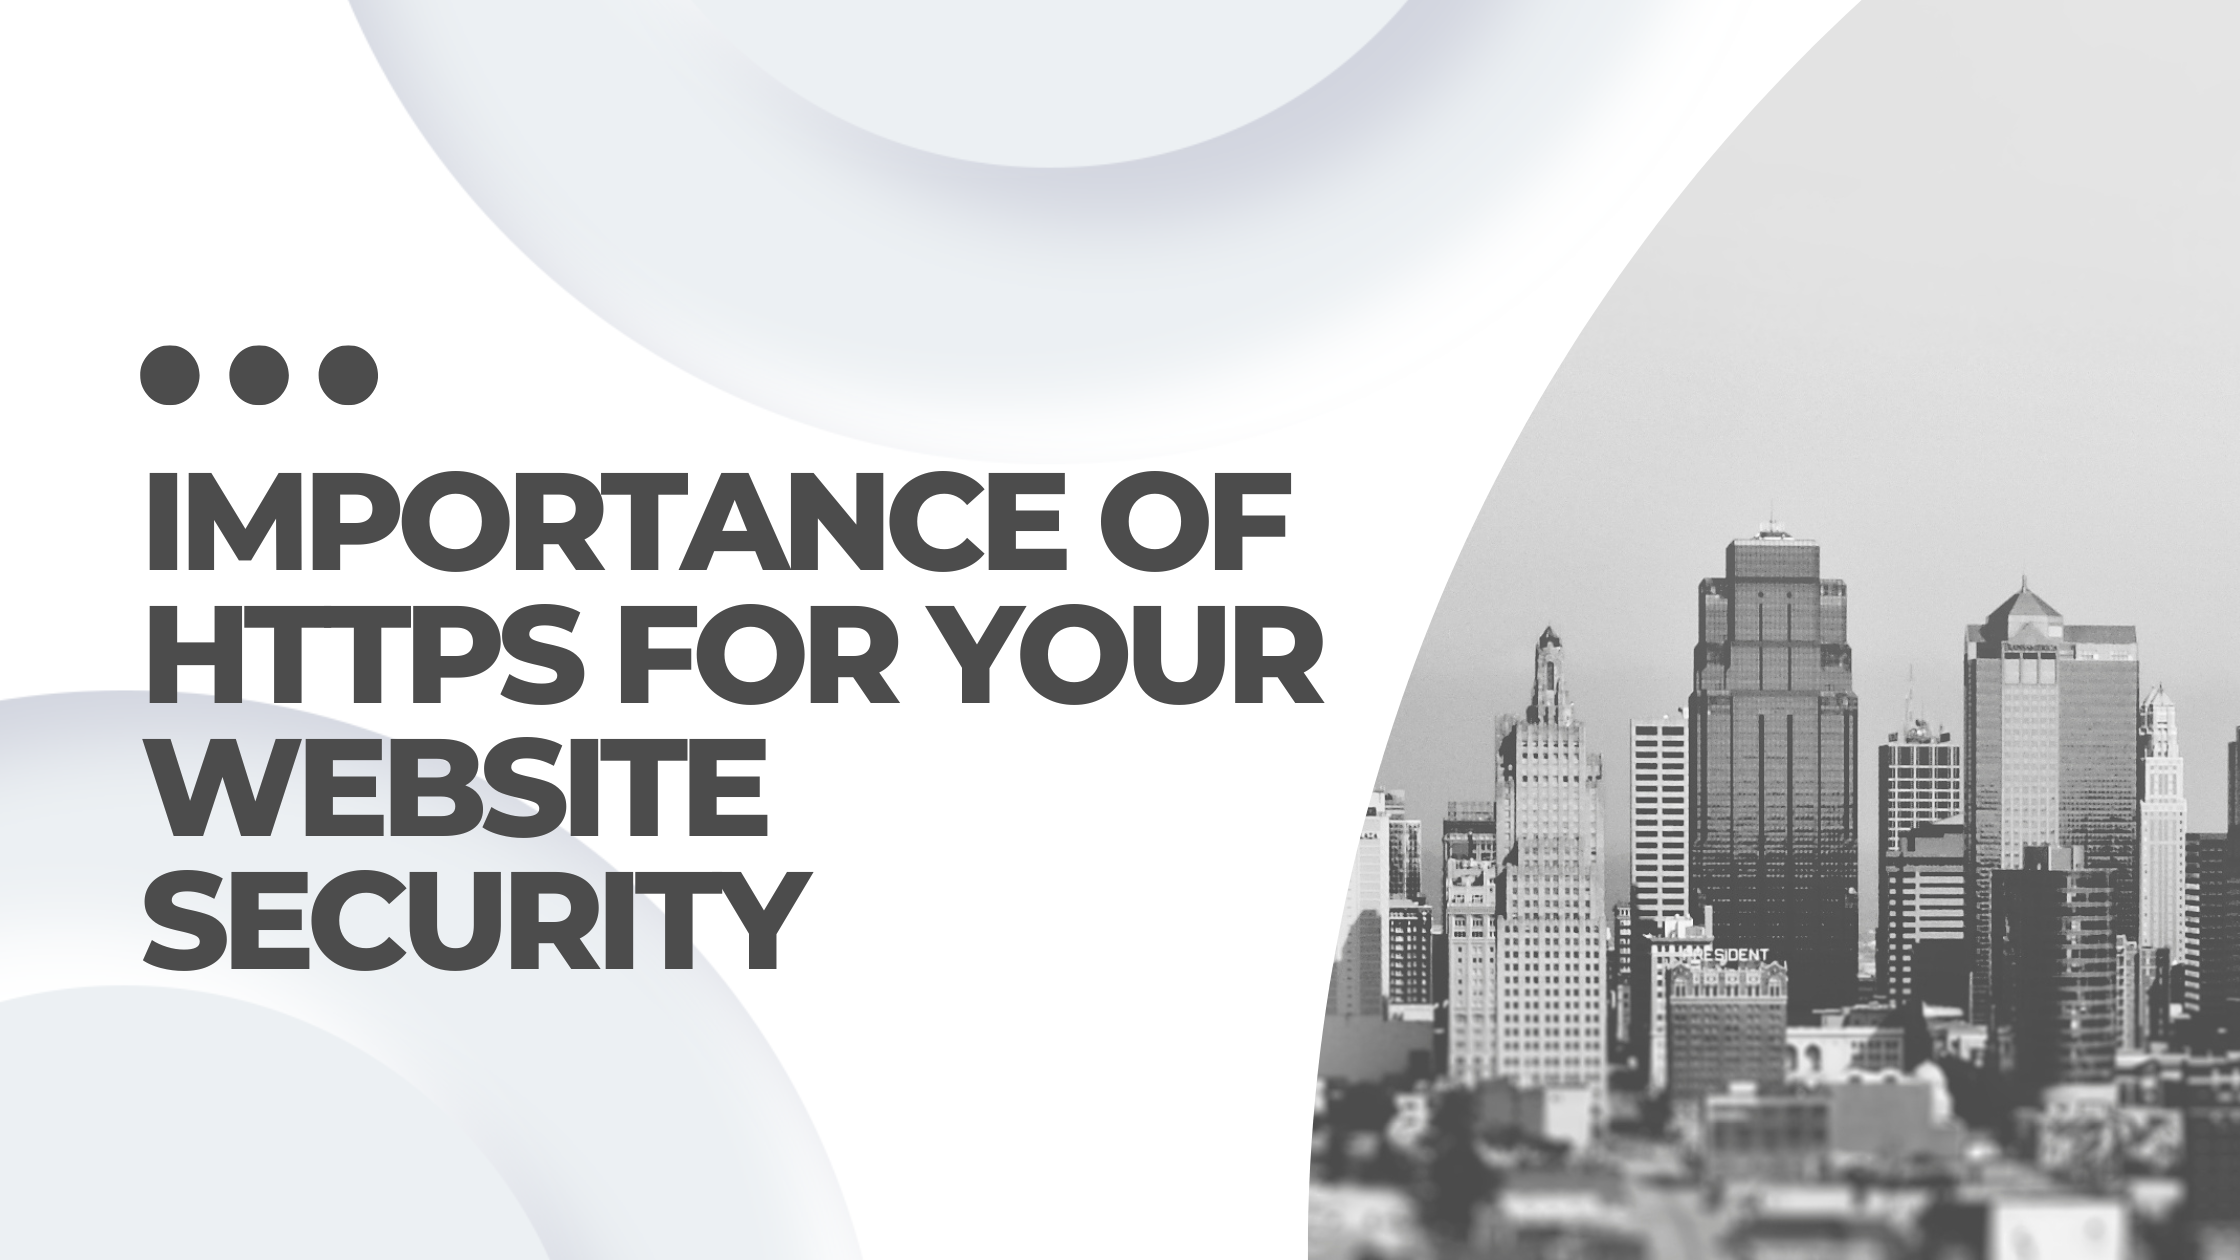 Importance of HTTPS for Your Website Security